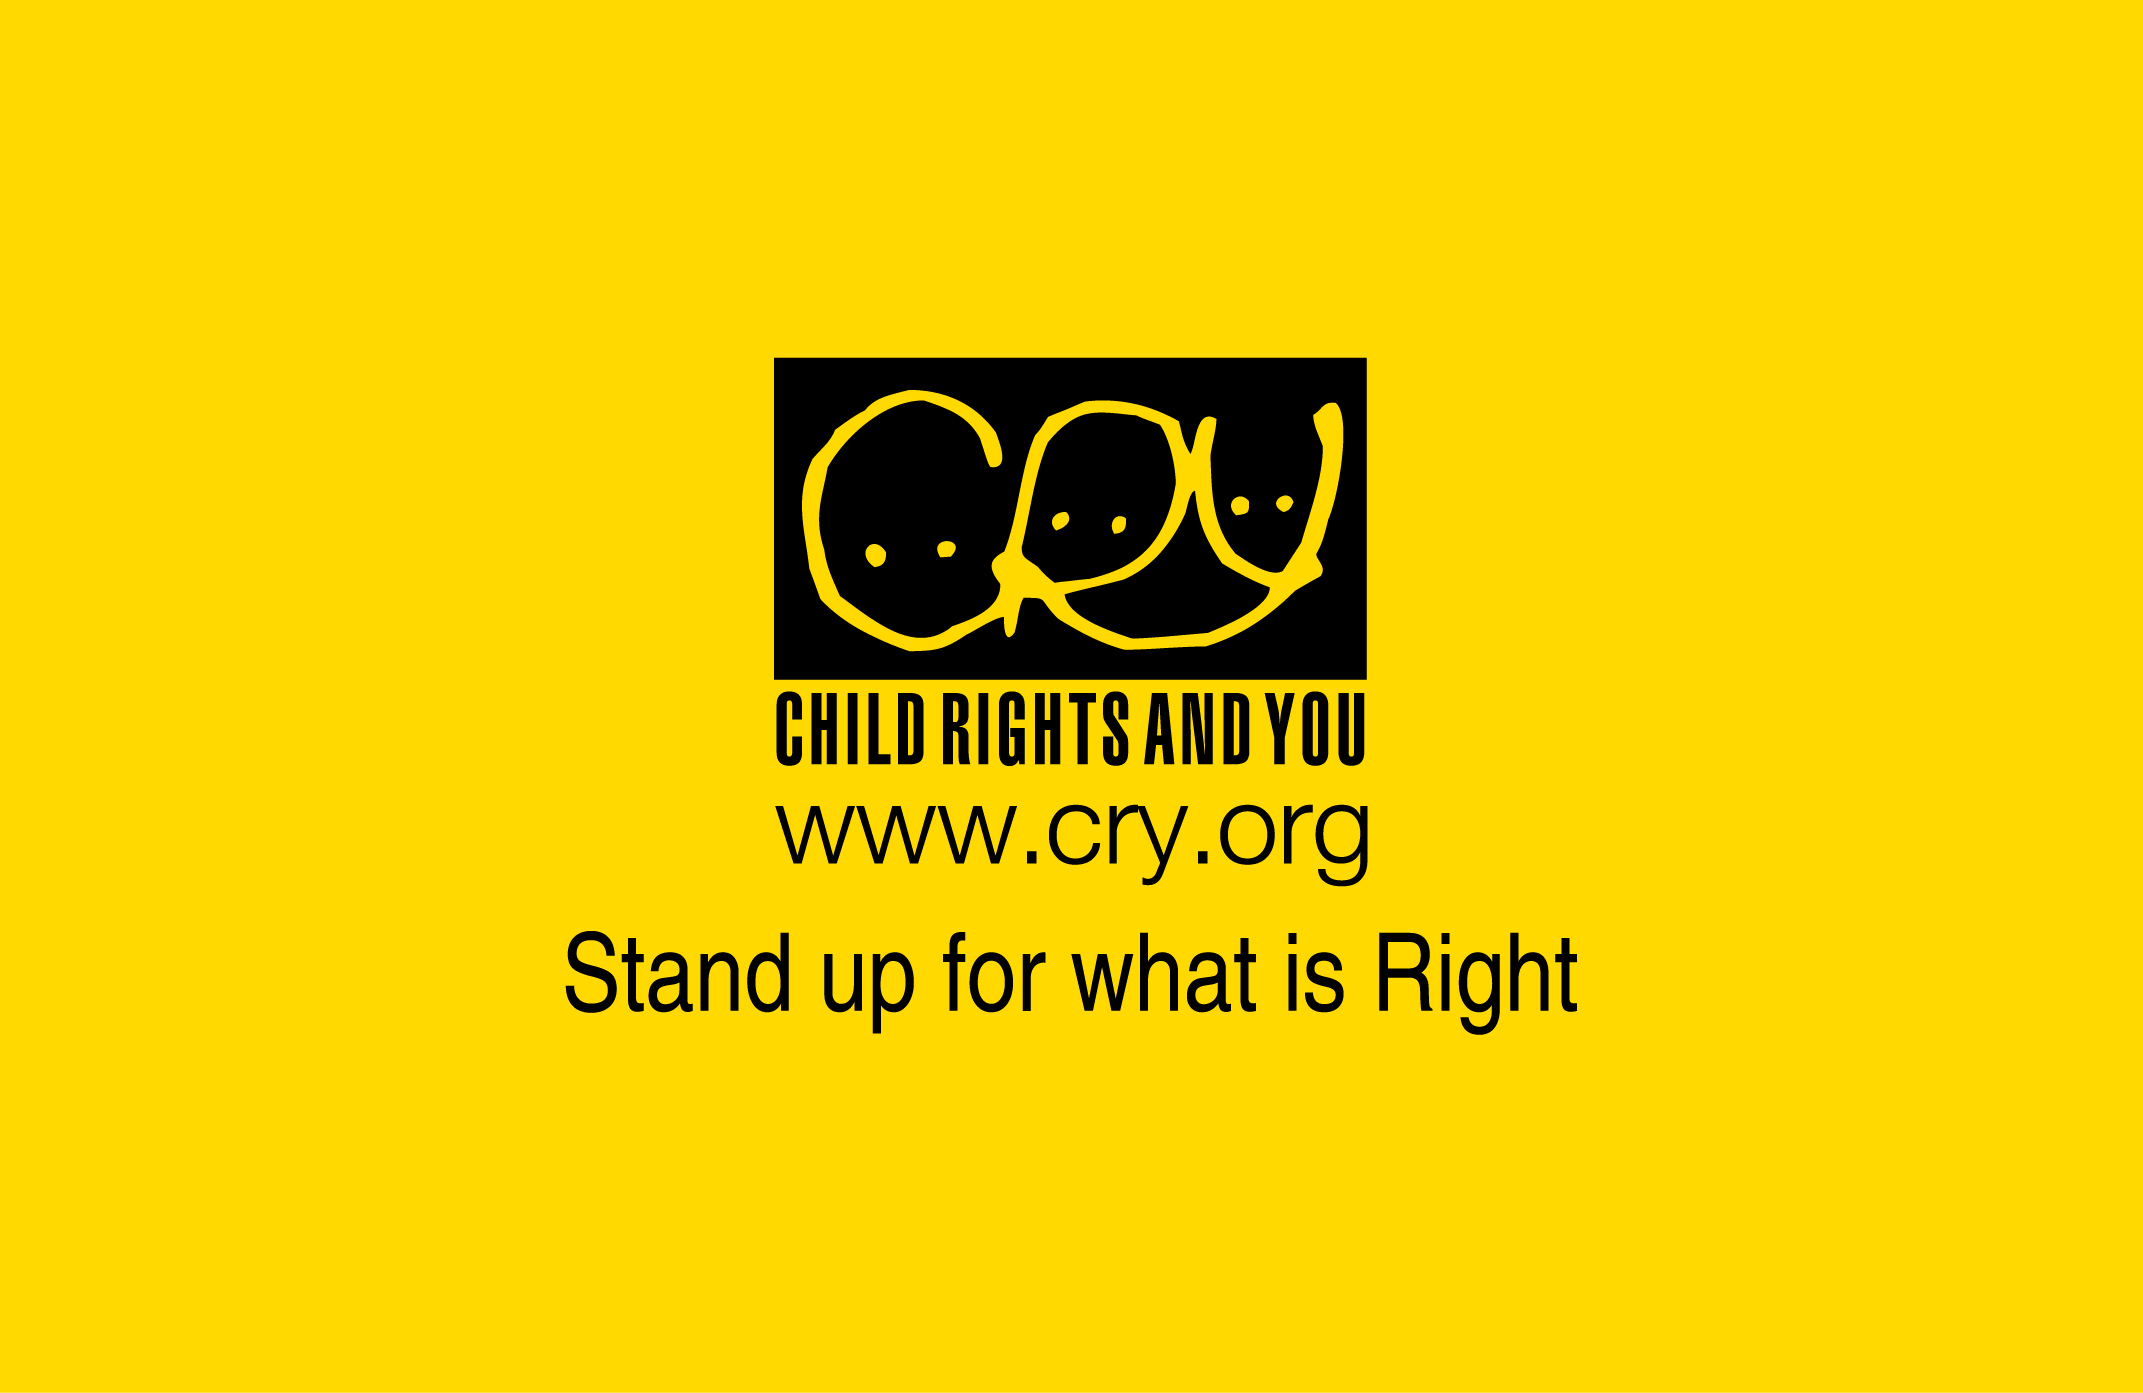 CRY – Child Rights and You